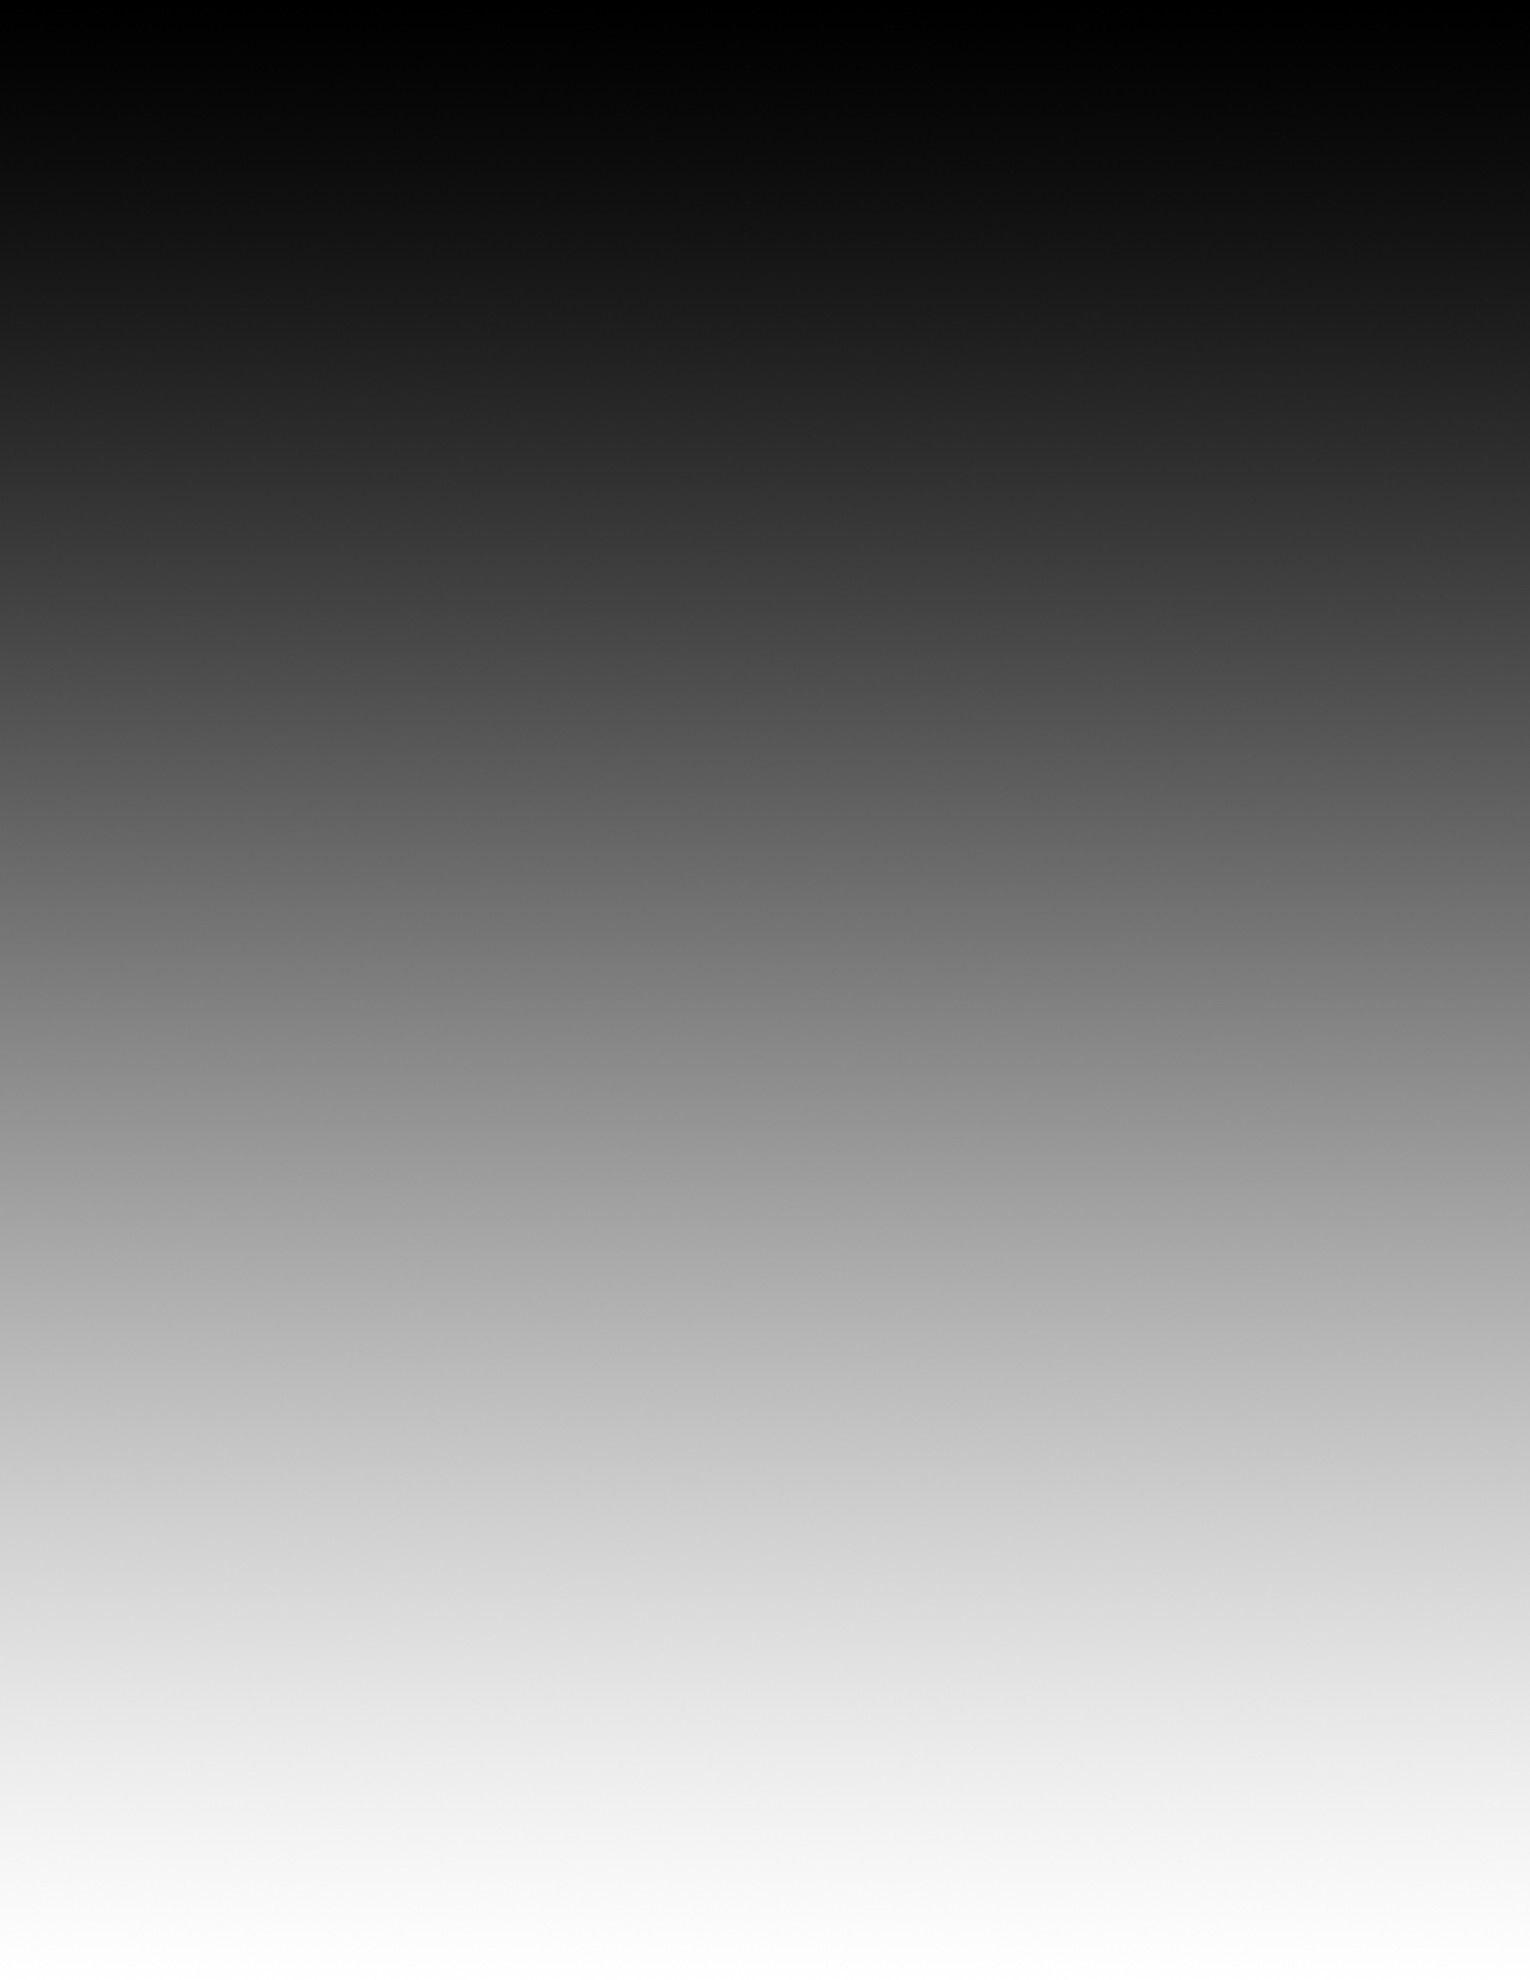 Black and Gray Wallpapers - Top Free Black and Gray Backgrounds ...